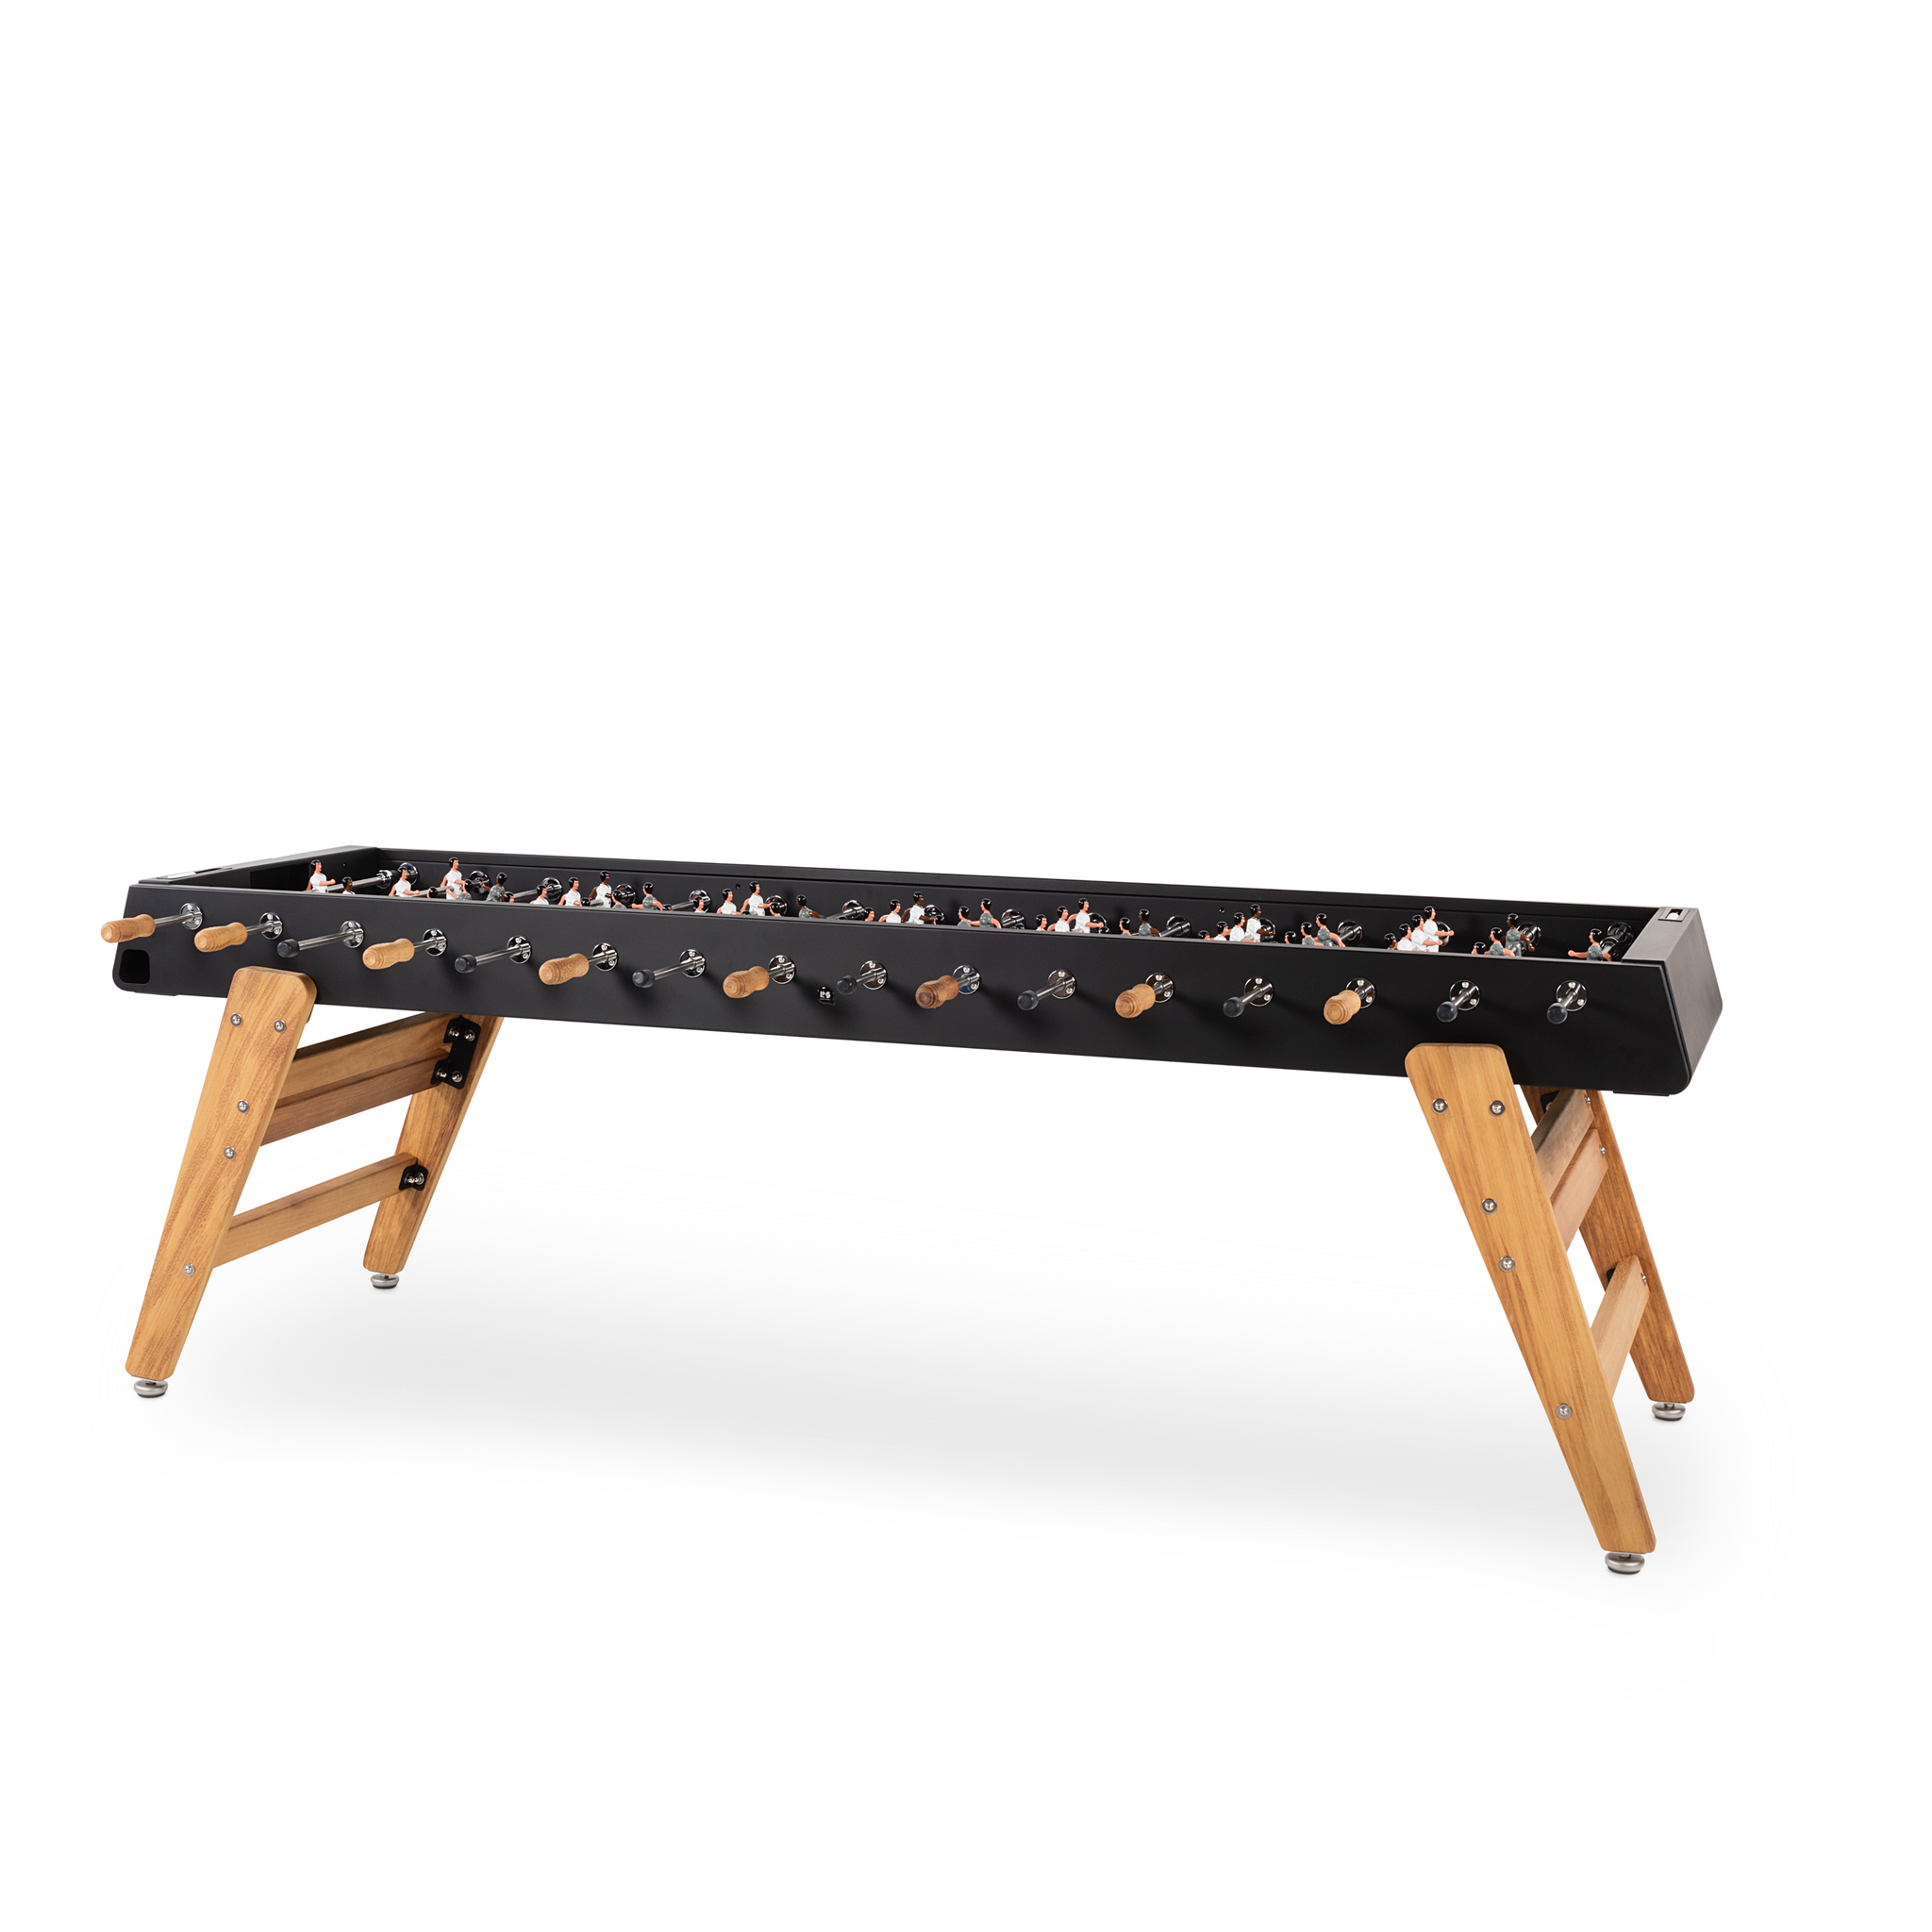 RS Wood Max Foosball Table for 8 players